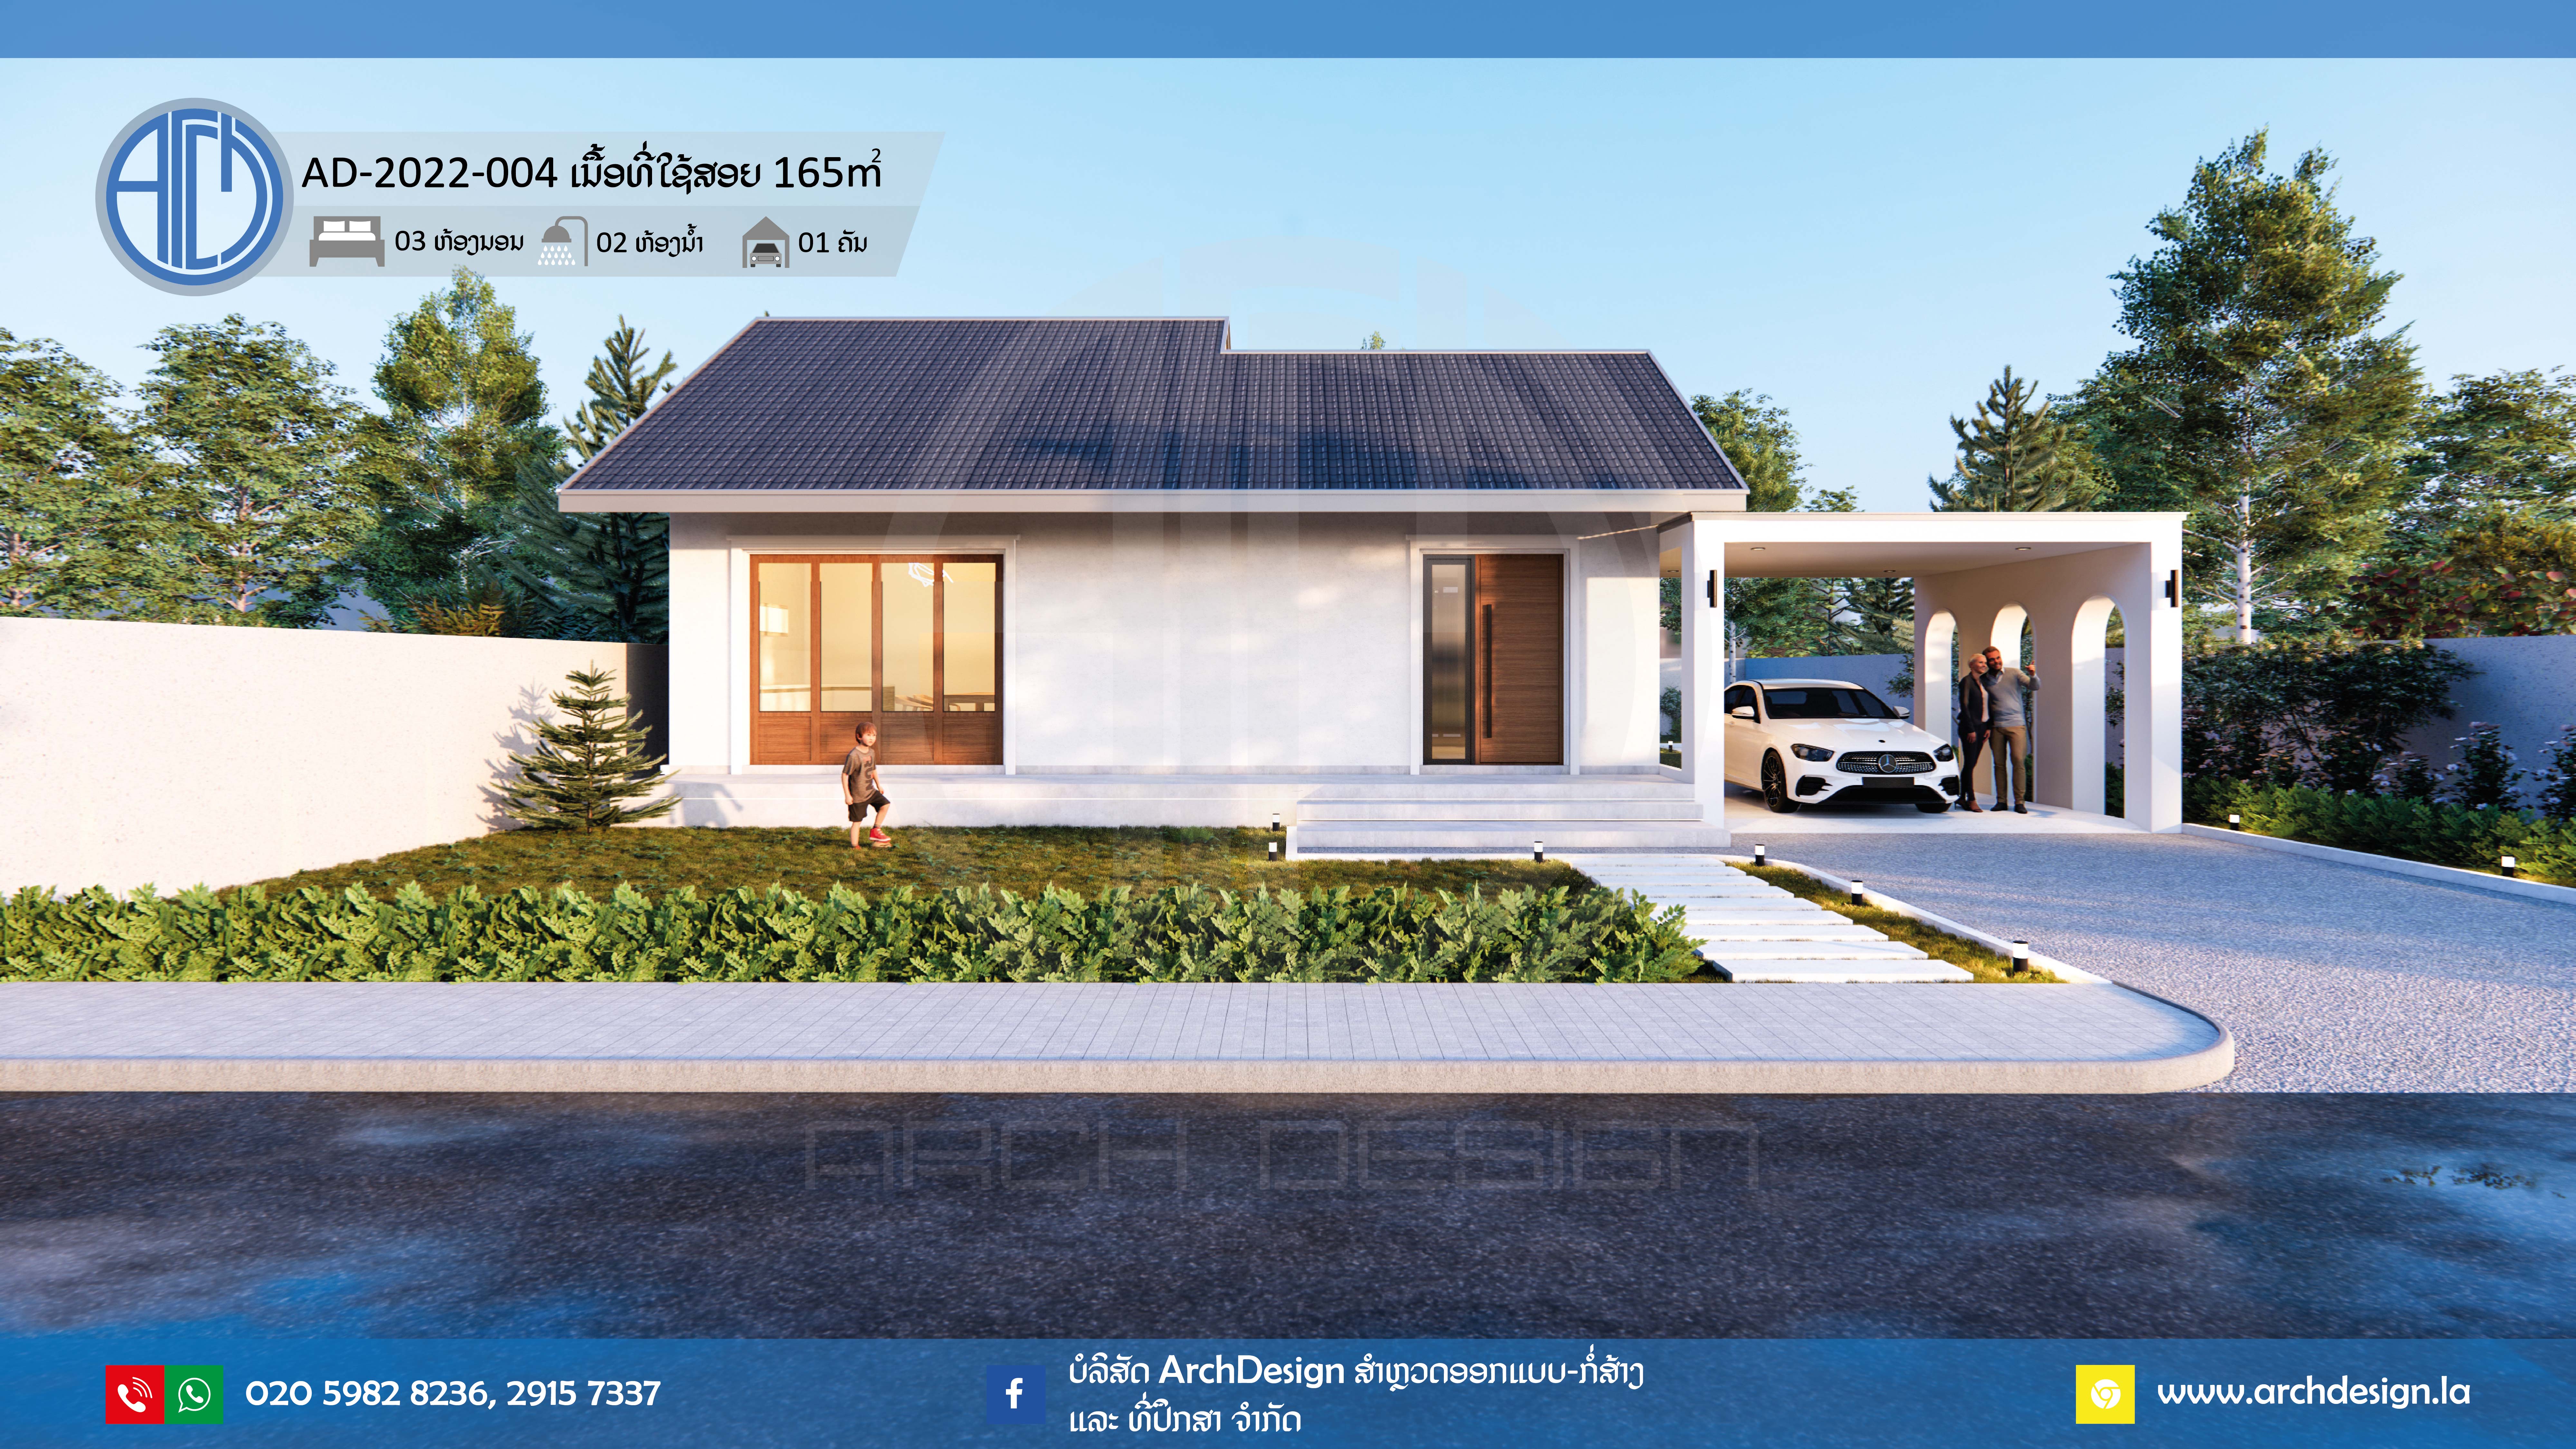 one-storey house. AD-2022-004